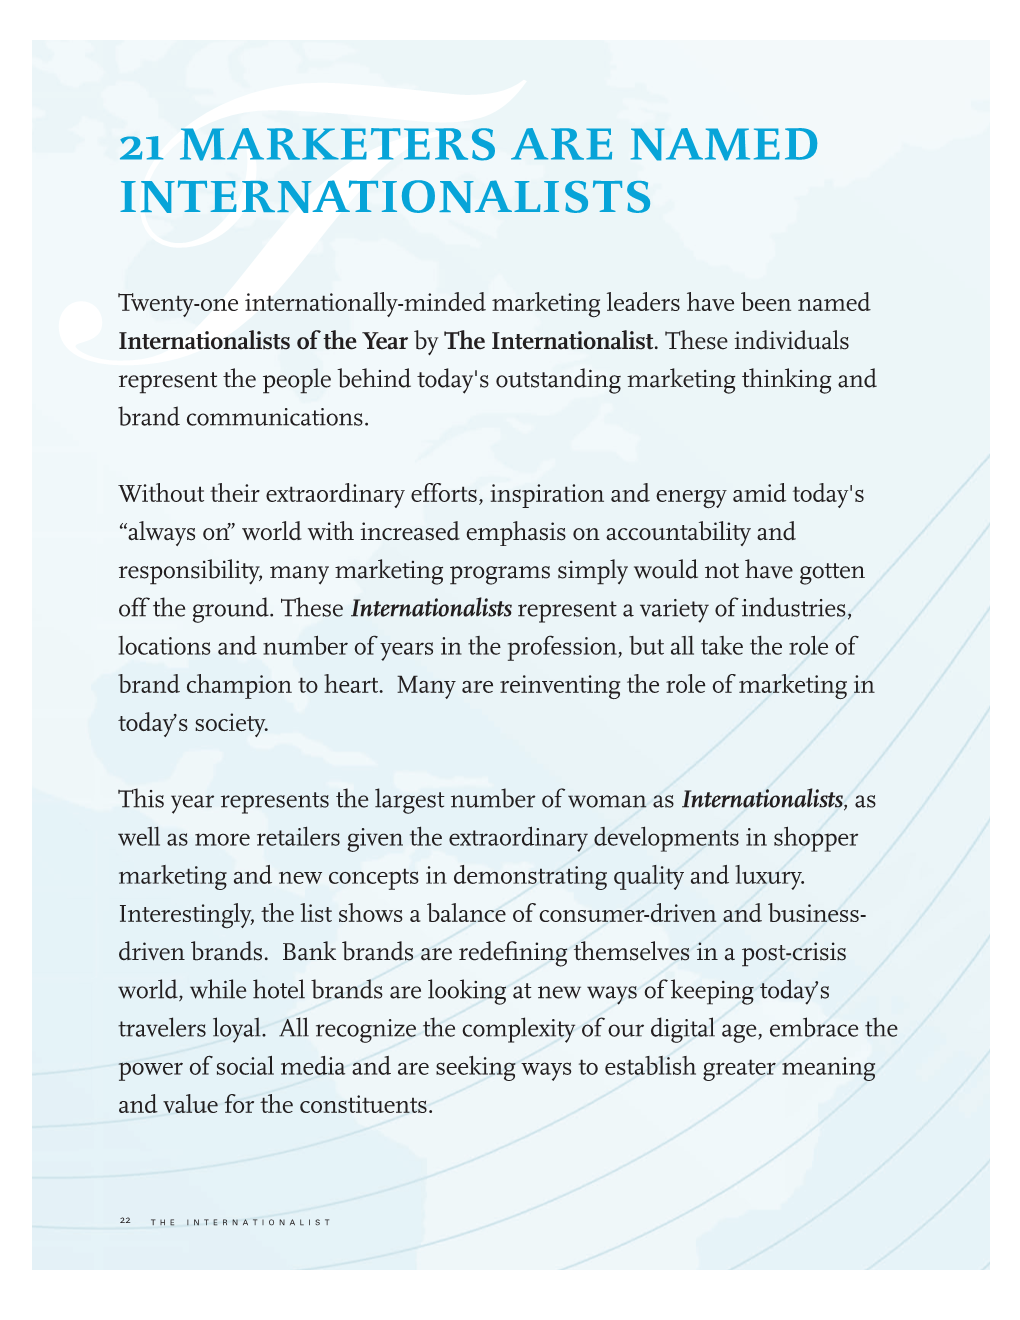 21 Marketers Are Named Internationalists